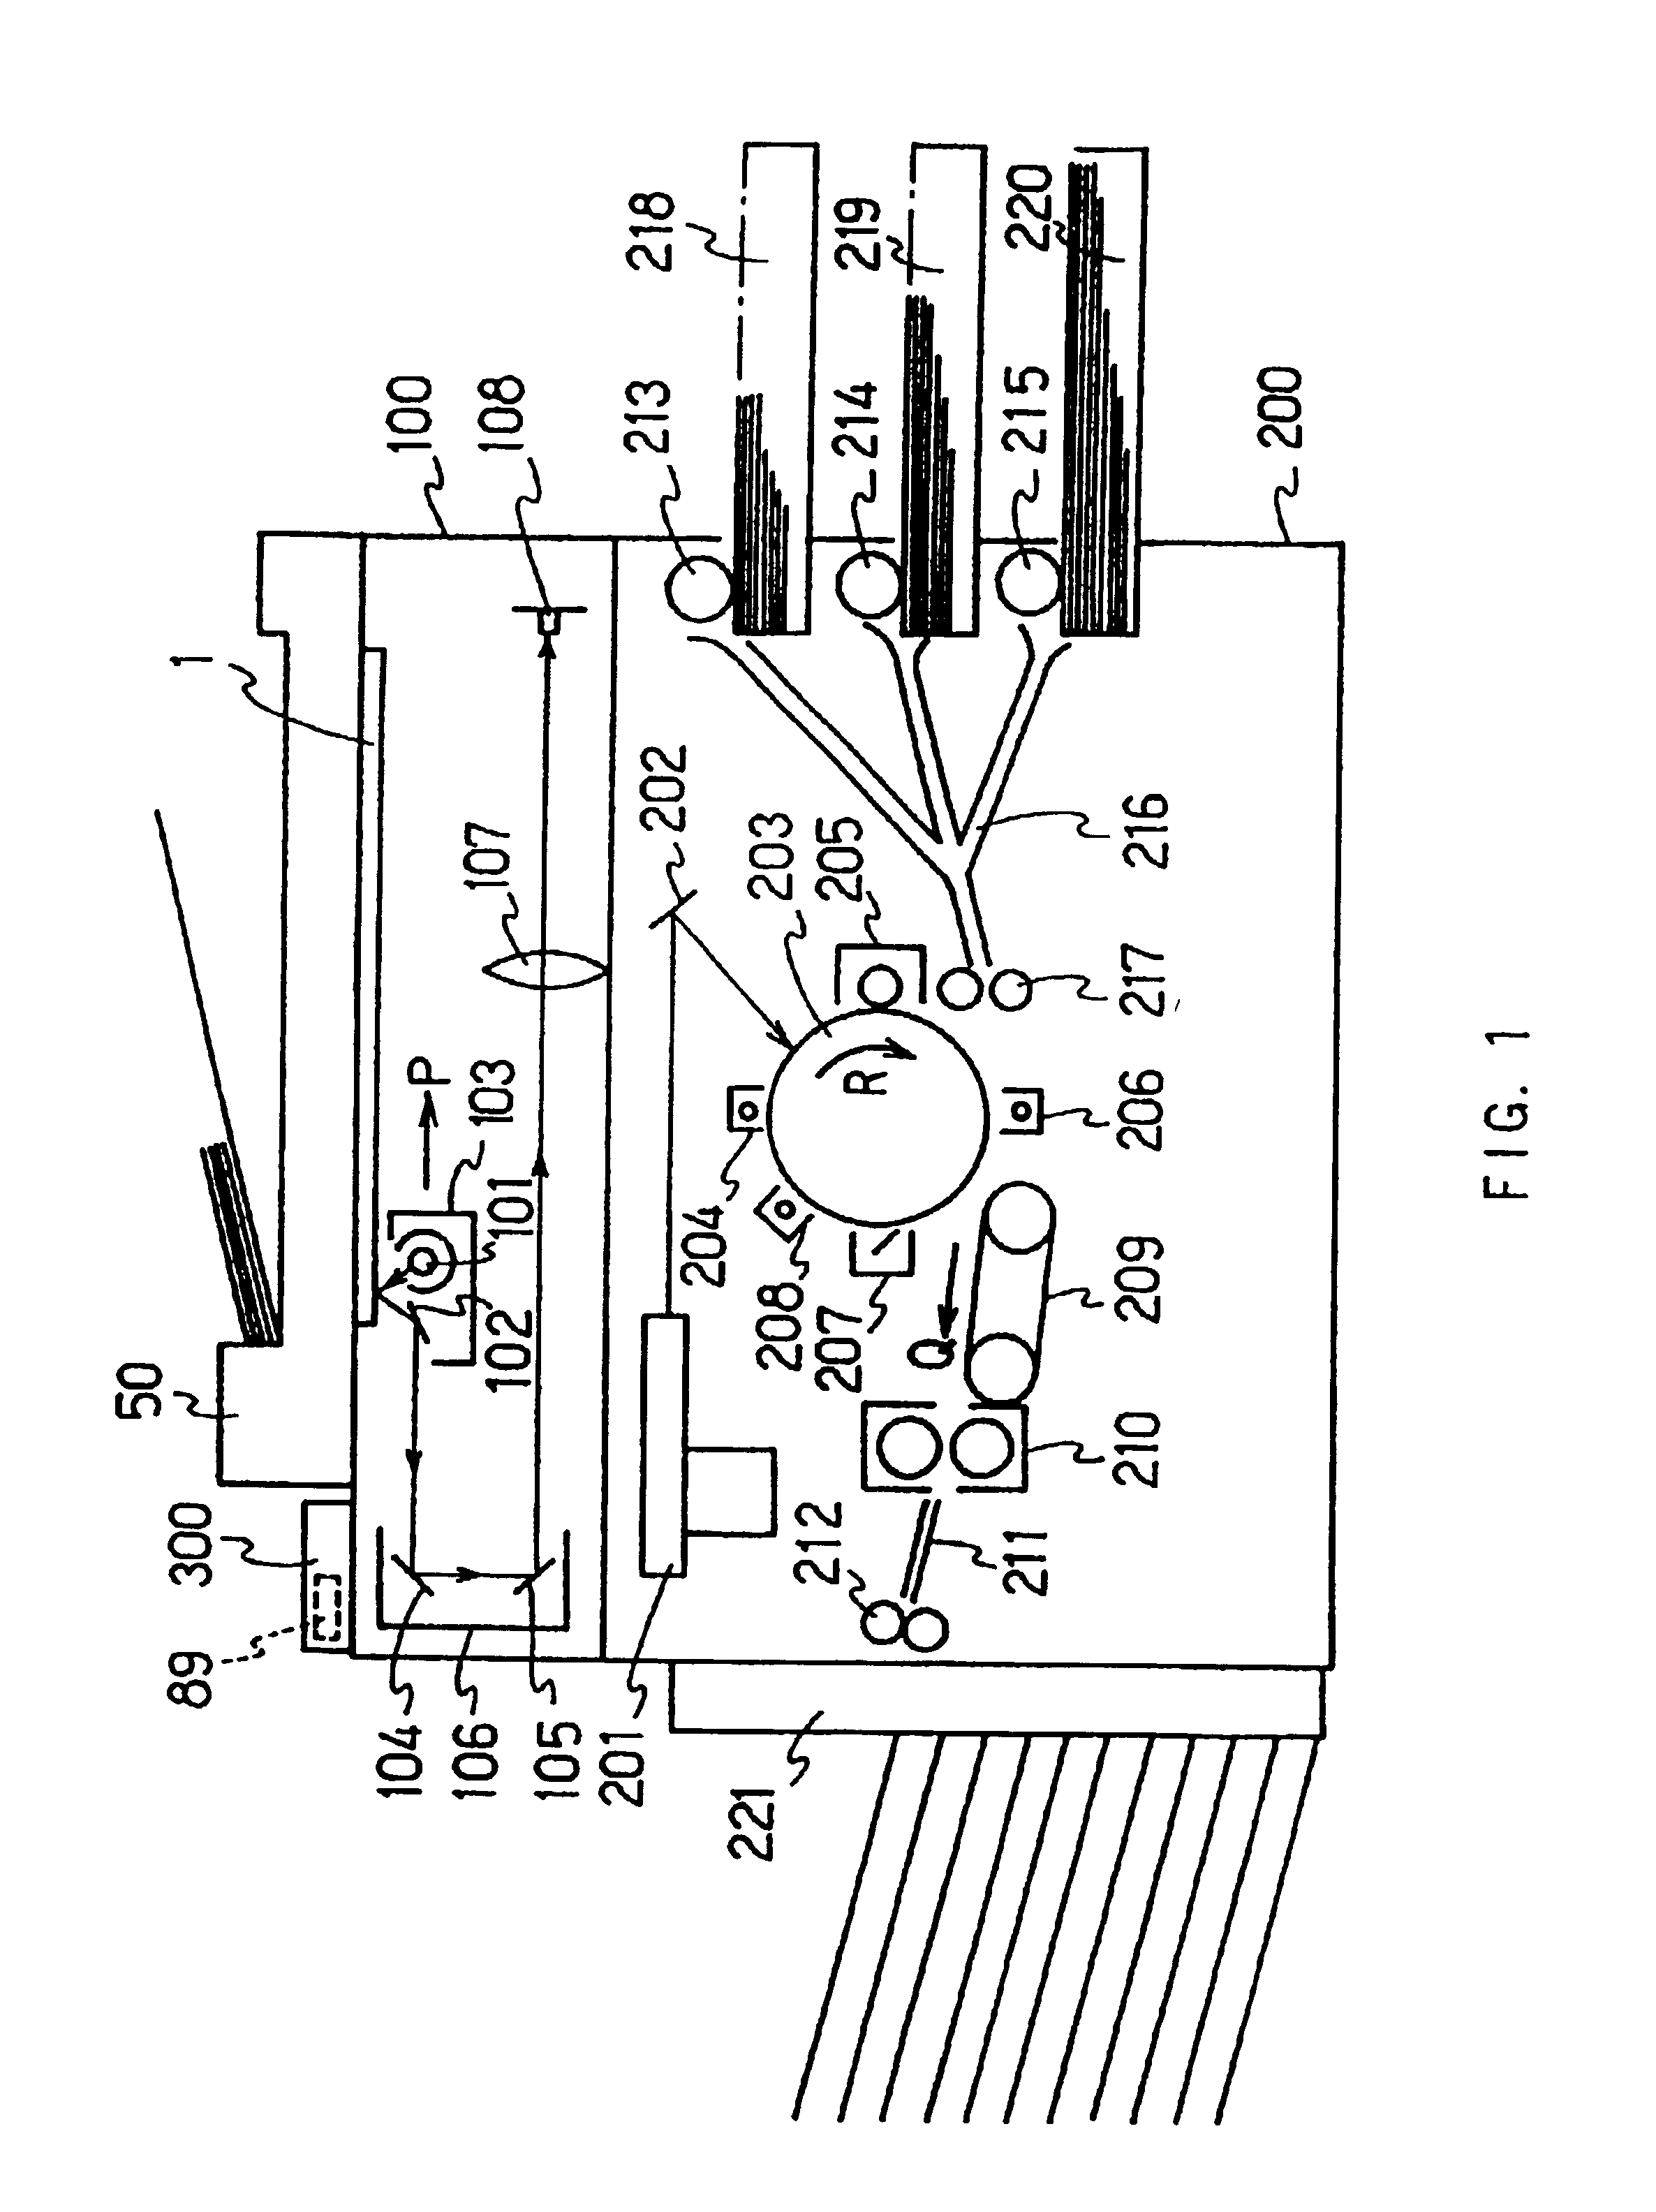 Offline print method using a printer apparatus and an external apparatus for printing out image data on a removable medium